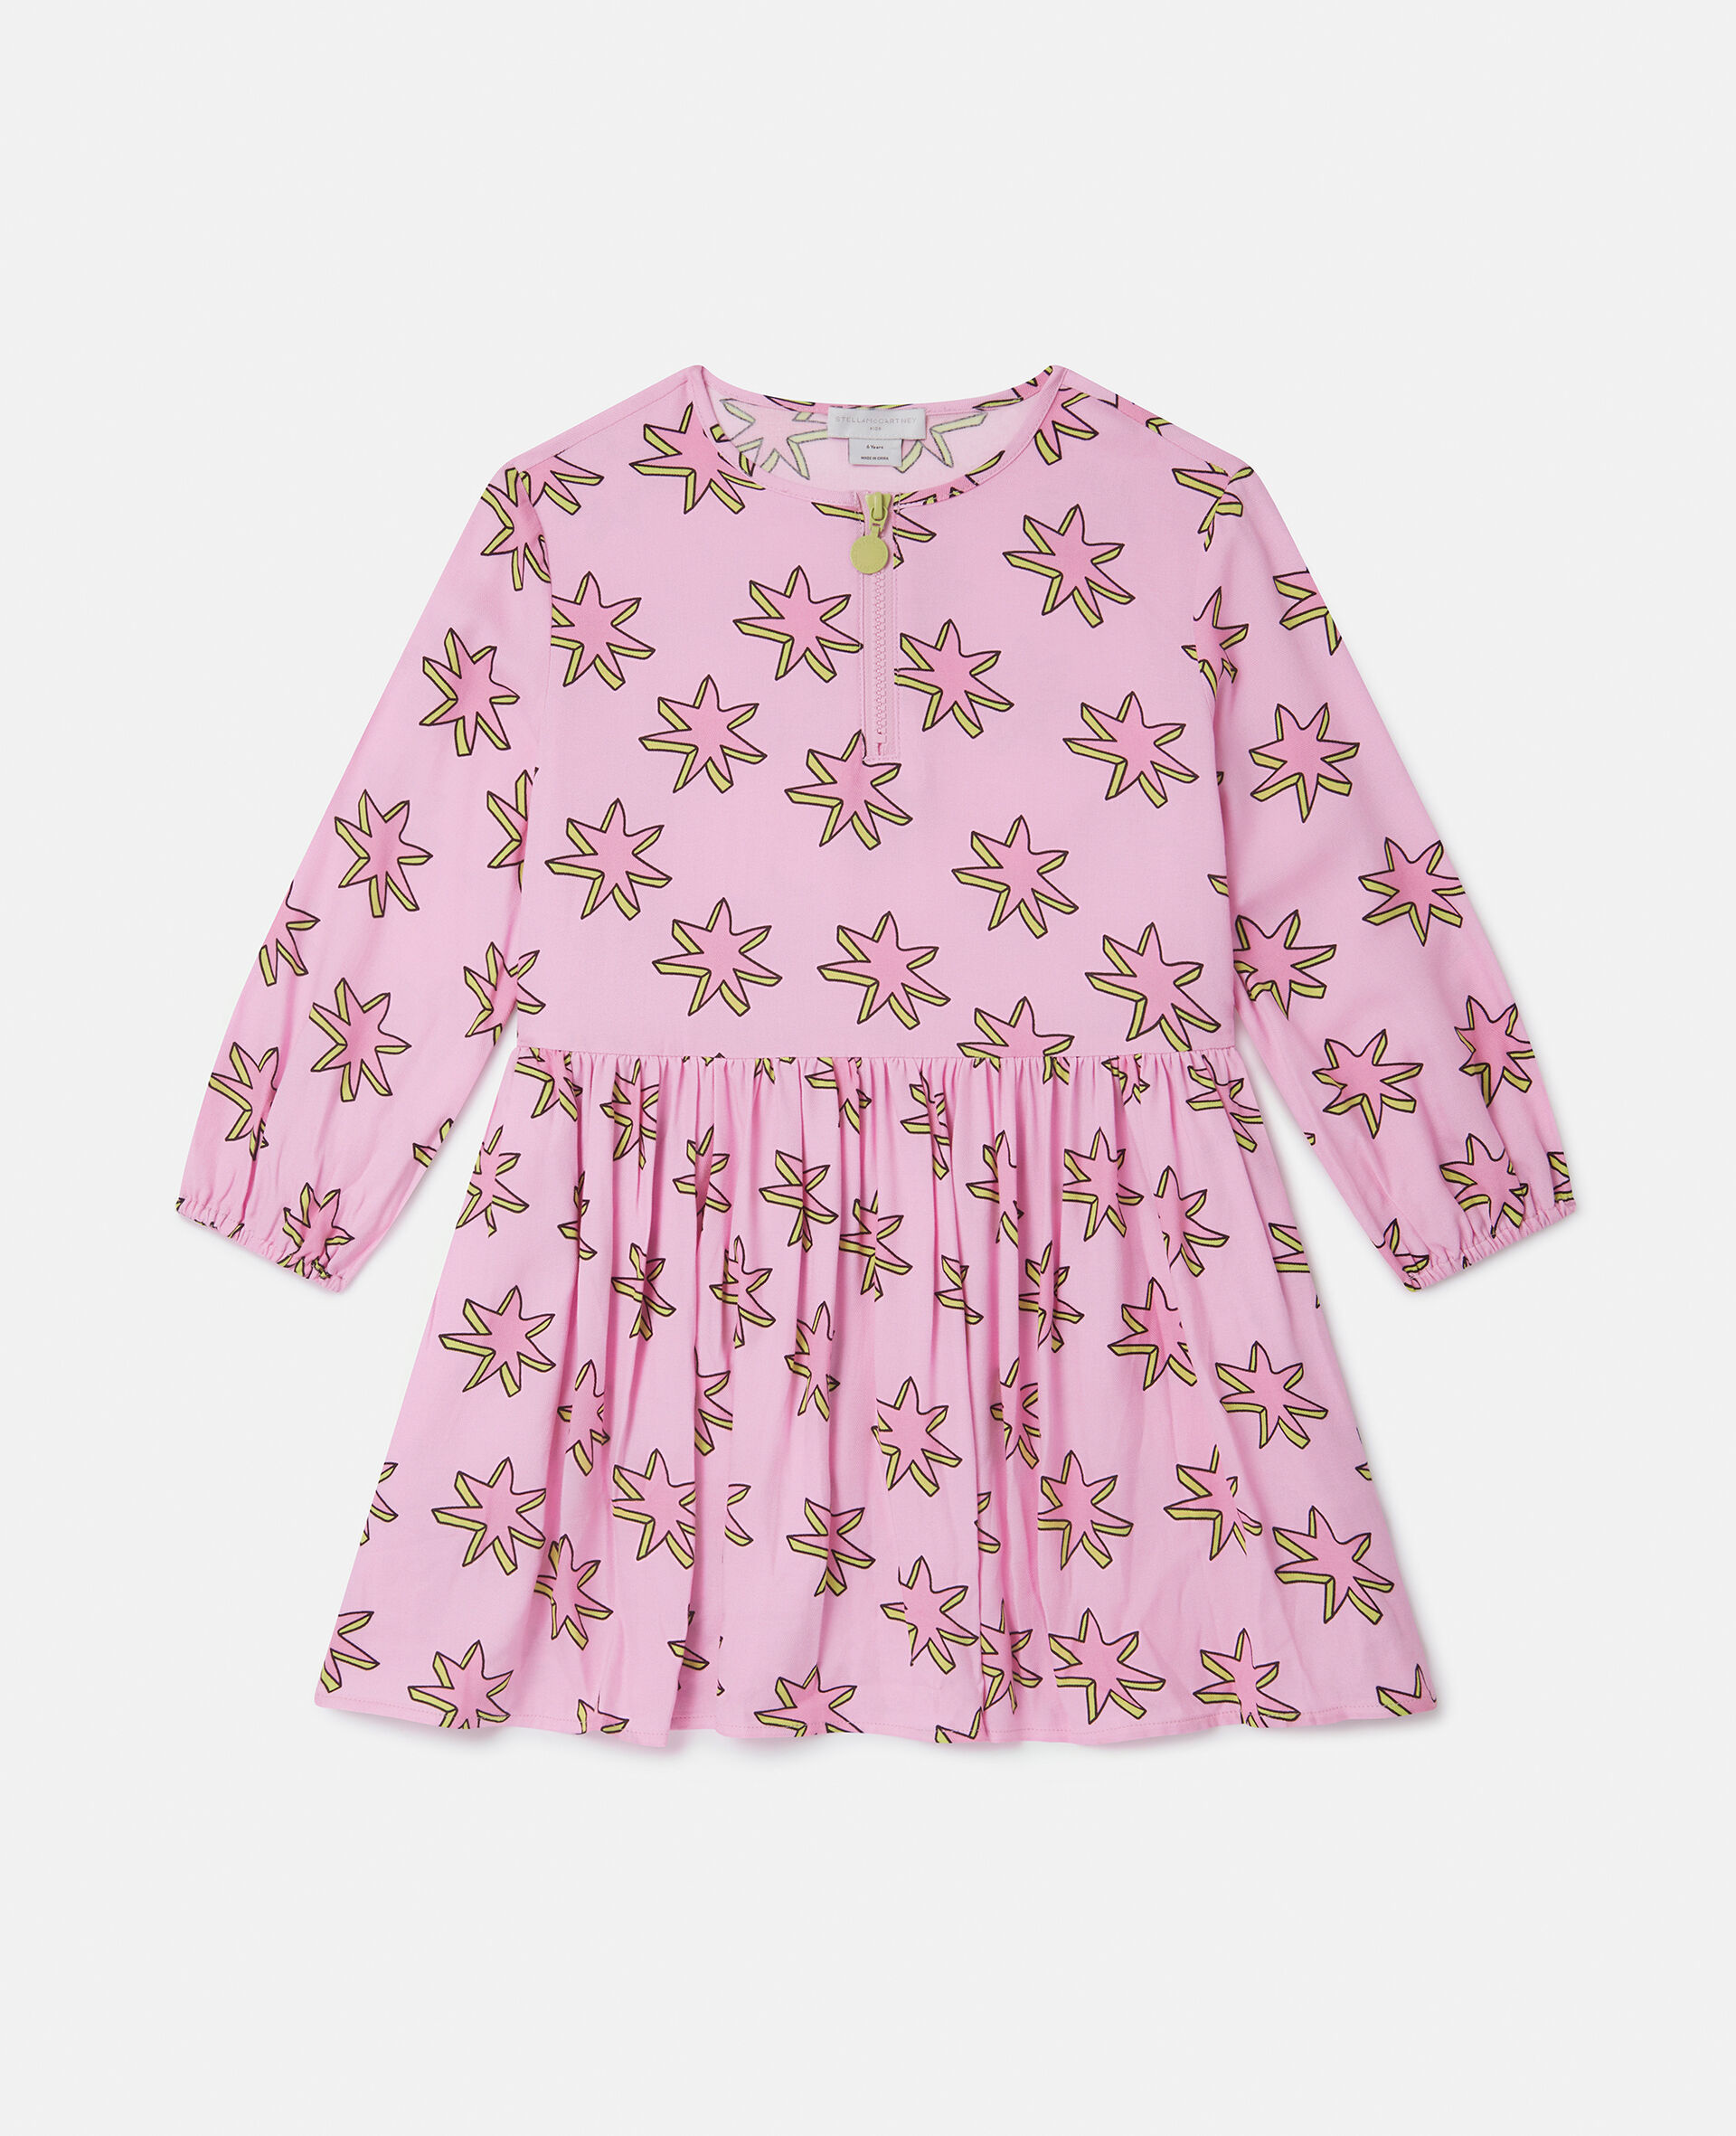 Shooting Stars Pleated Dress-Pink-large image number 0